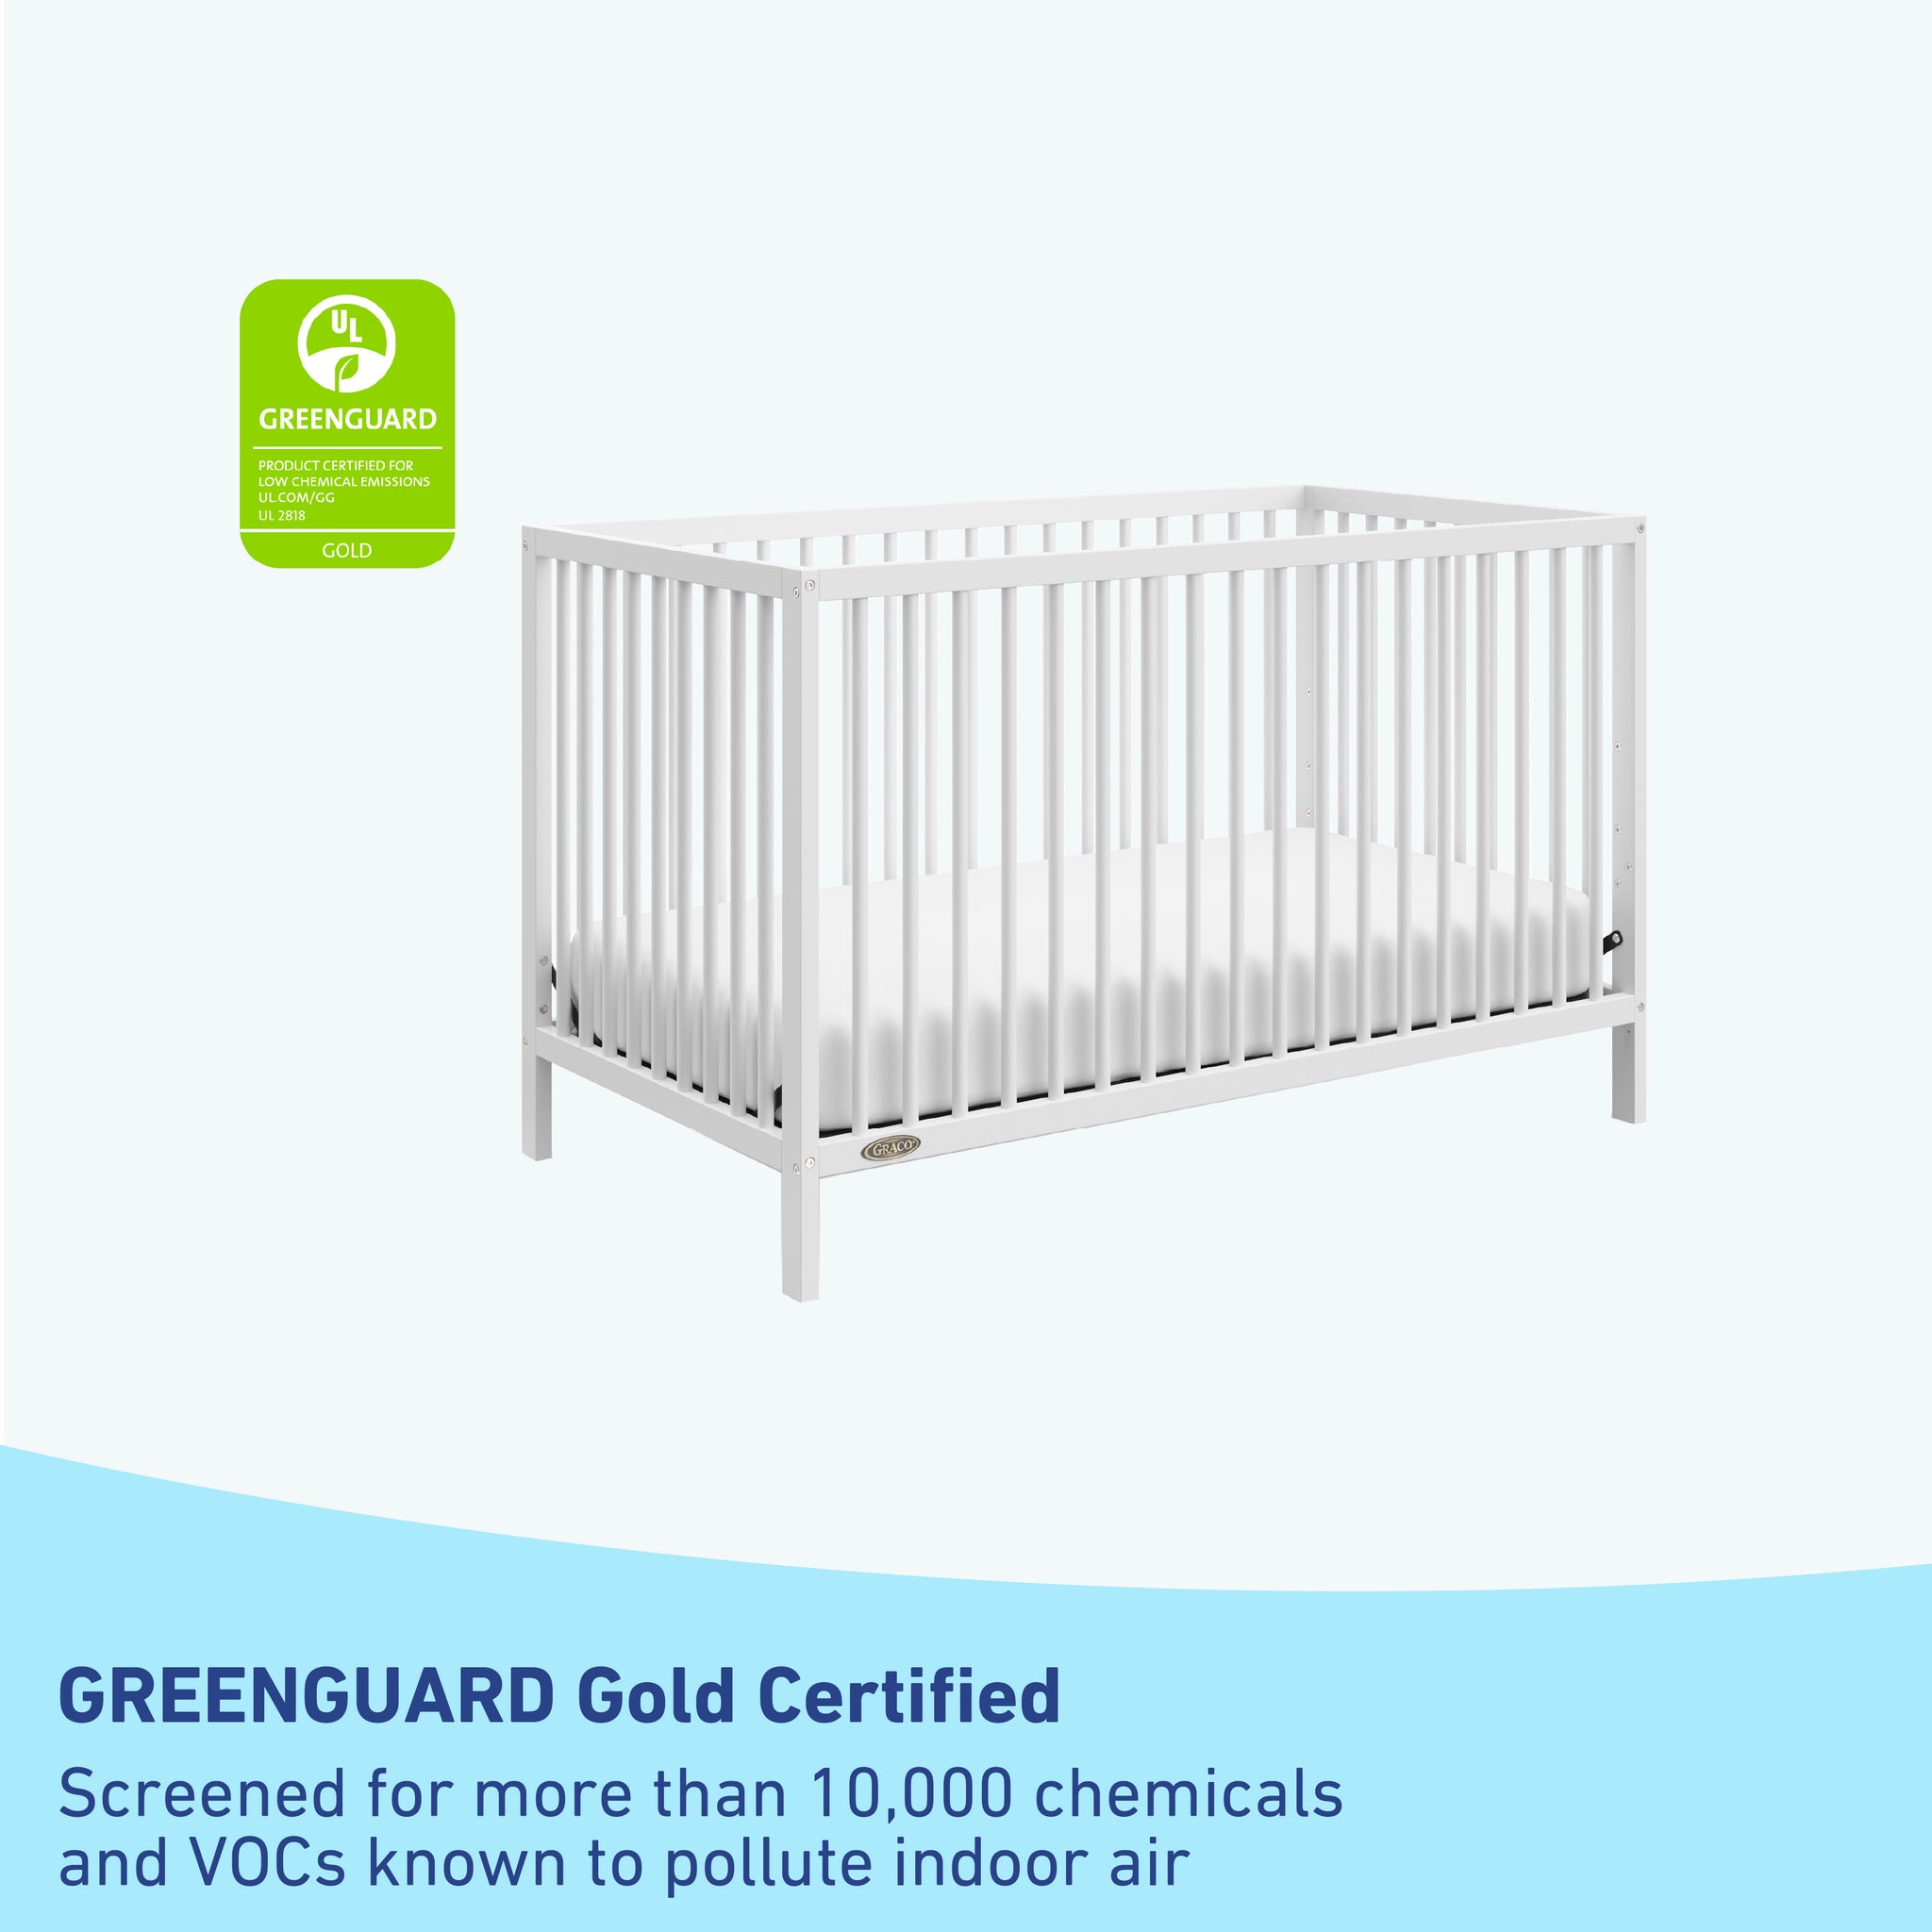 White crib with GREENGUARD Gold Certified badge